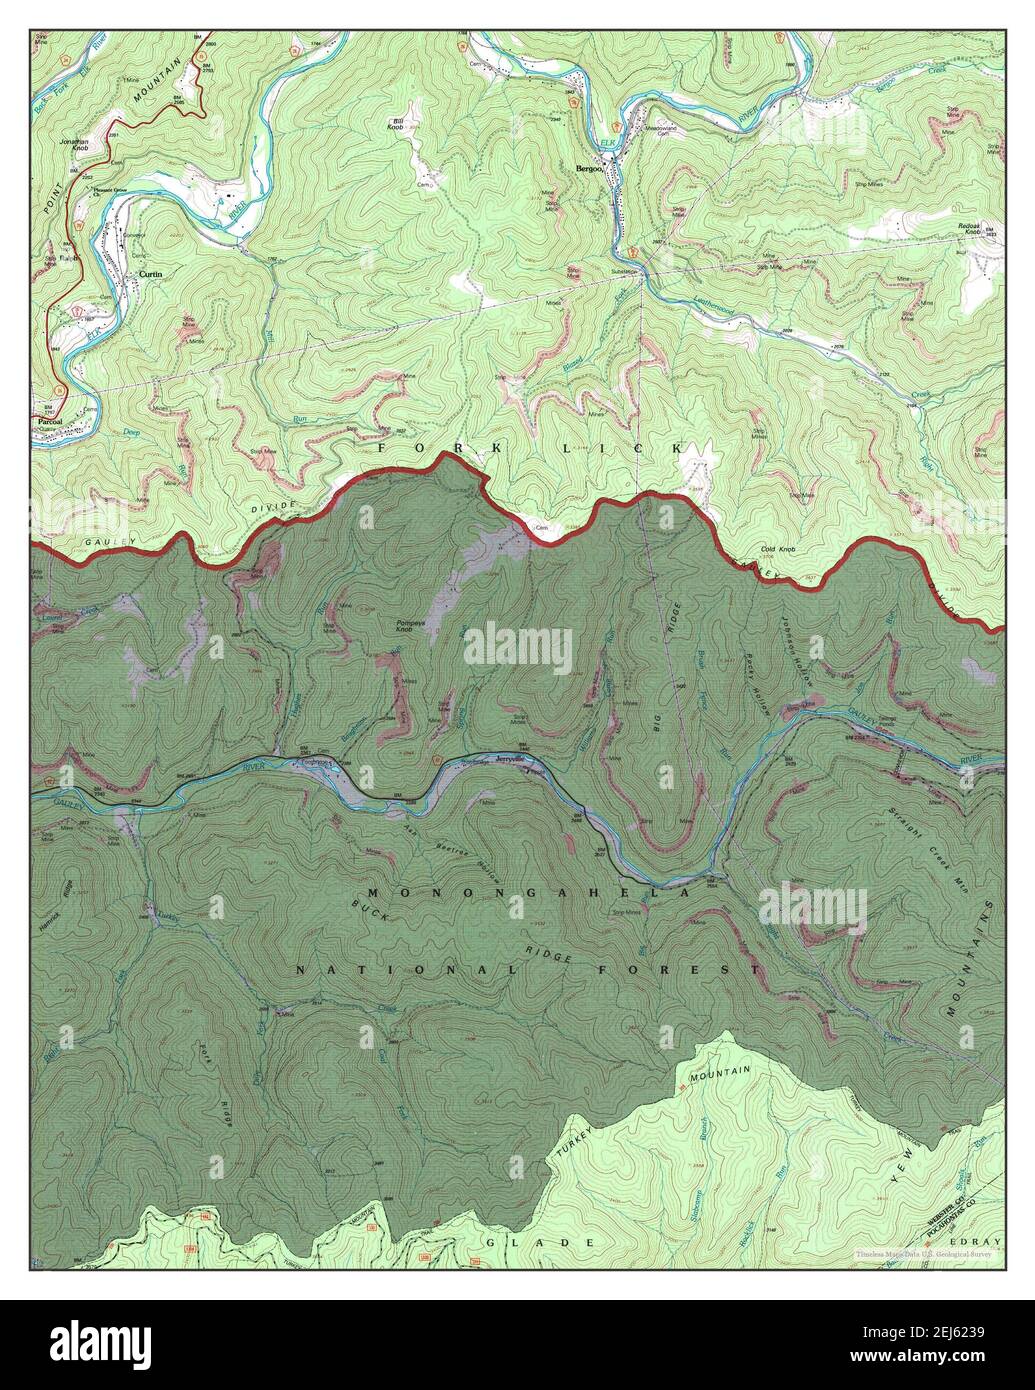 Bergoo, West Virginia, map 1995, 1:24000, United States of America by Timeless Maps, data U.S. Geological Survey Stock Photo